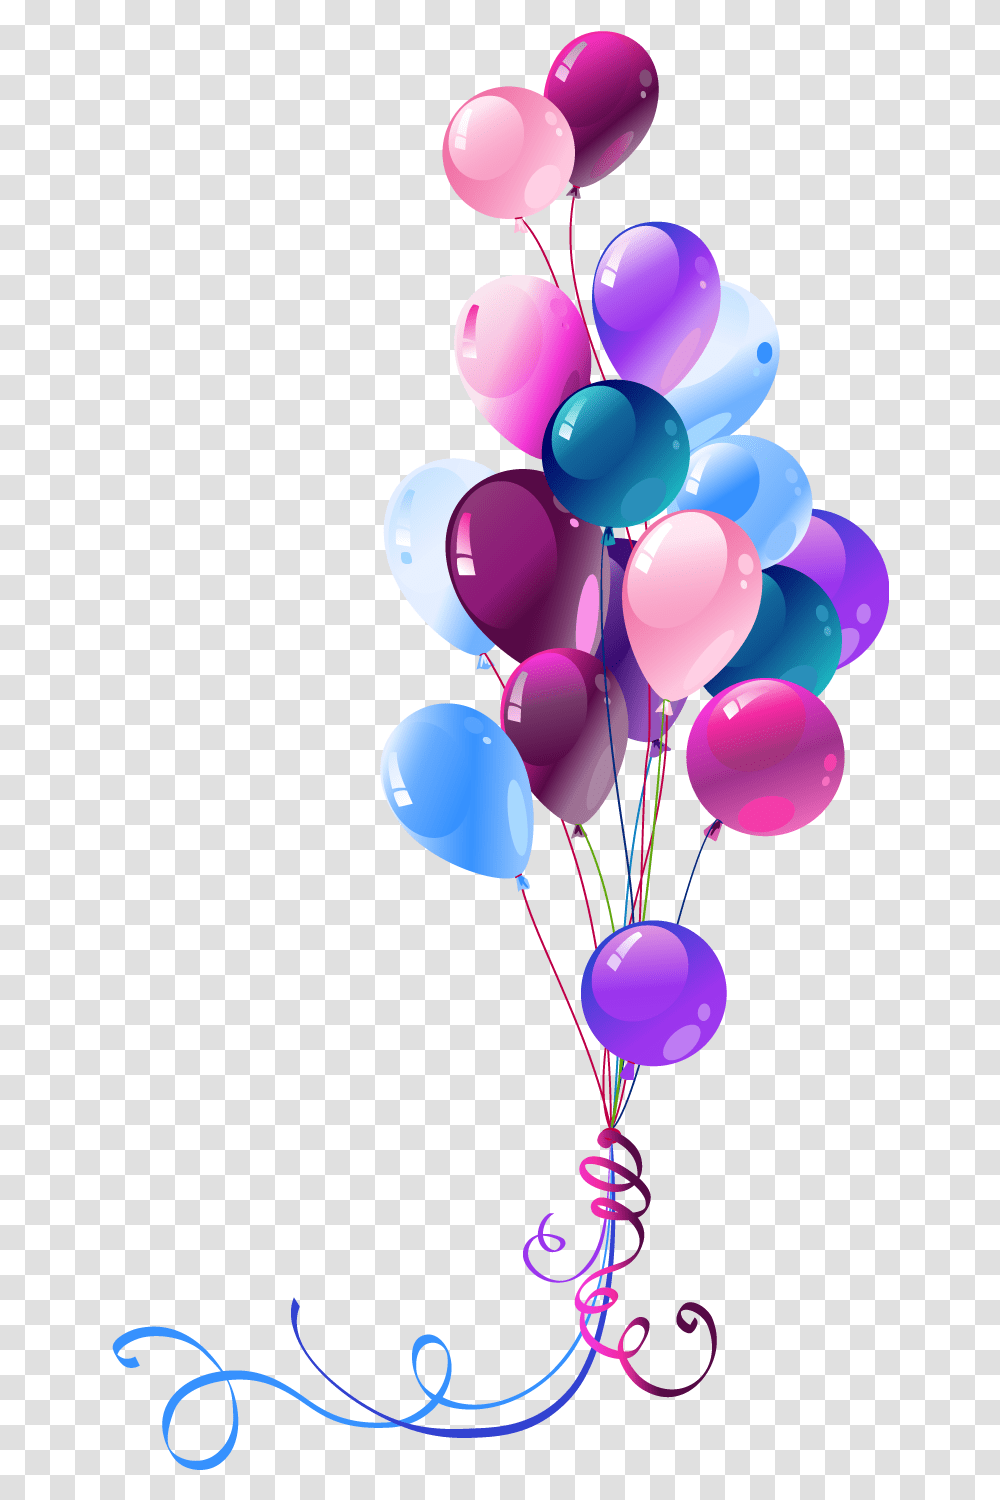 Free Ballons Download Clip Pink Birthday Balloons Transparent Png